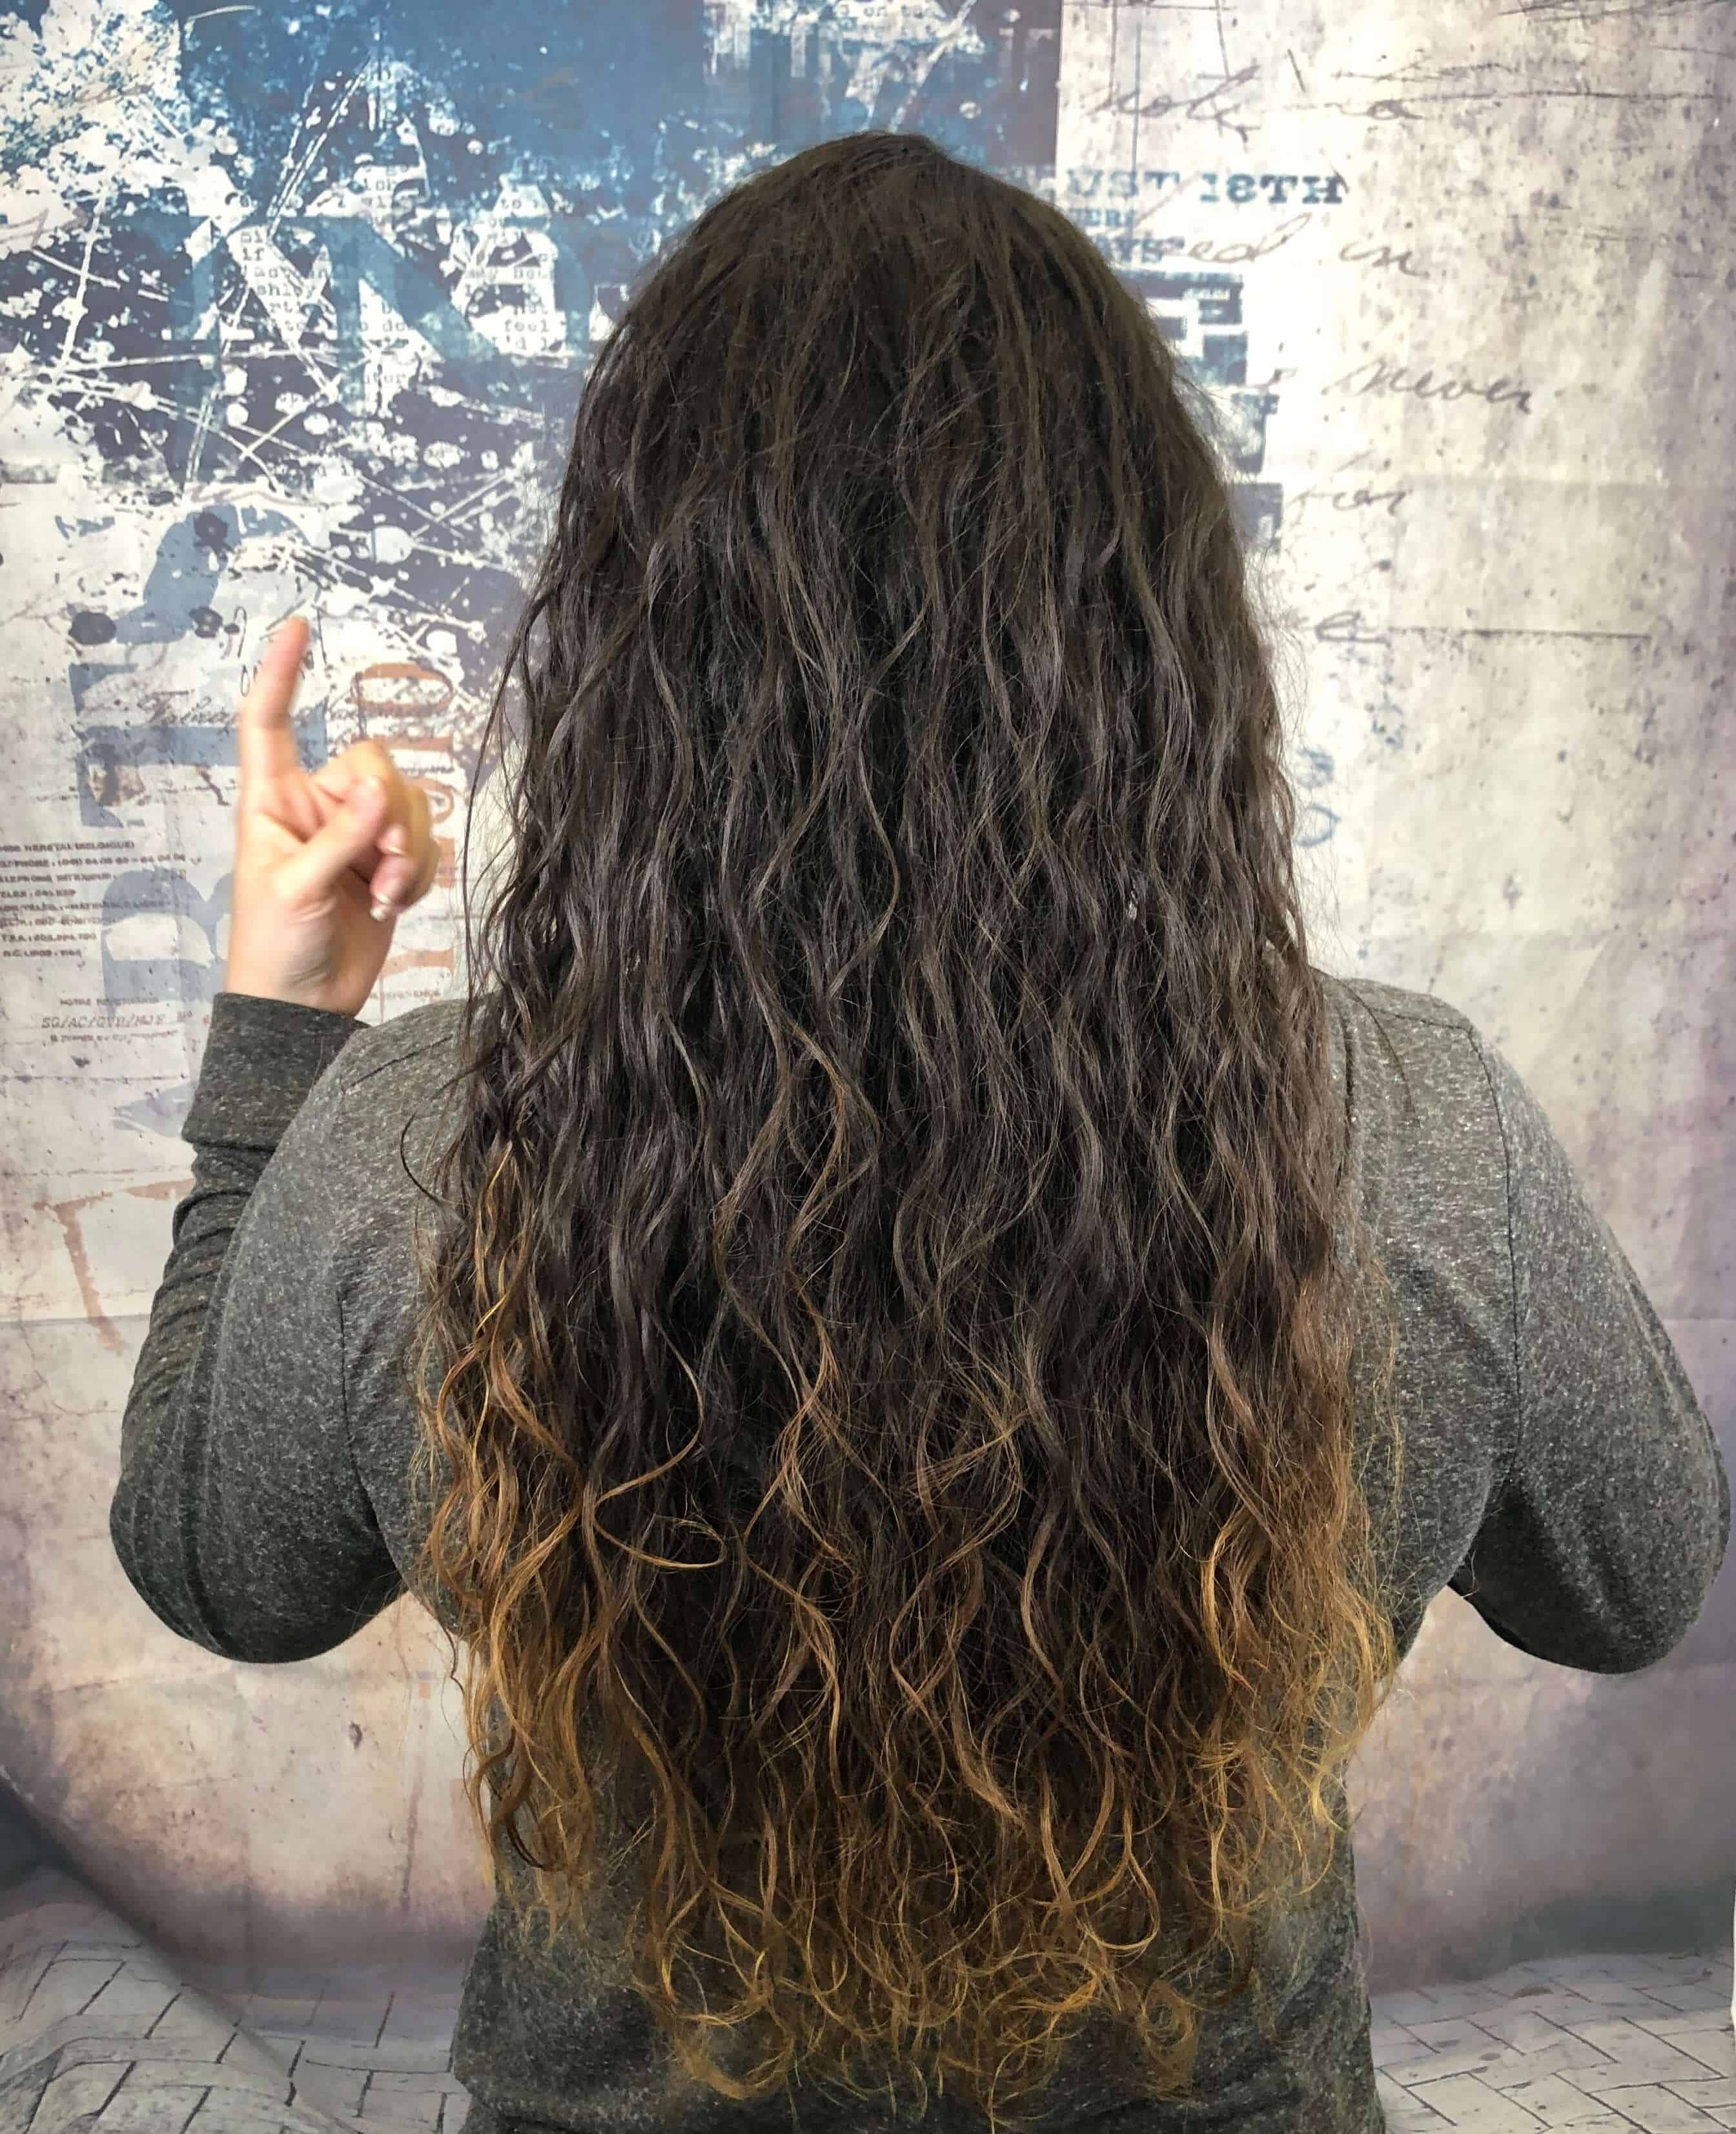 13 Modern Day Perms In 2019 [With Before &amp; After Pictures] pertaining to Loose Perm For Long Hair